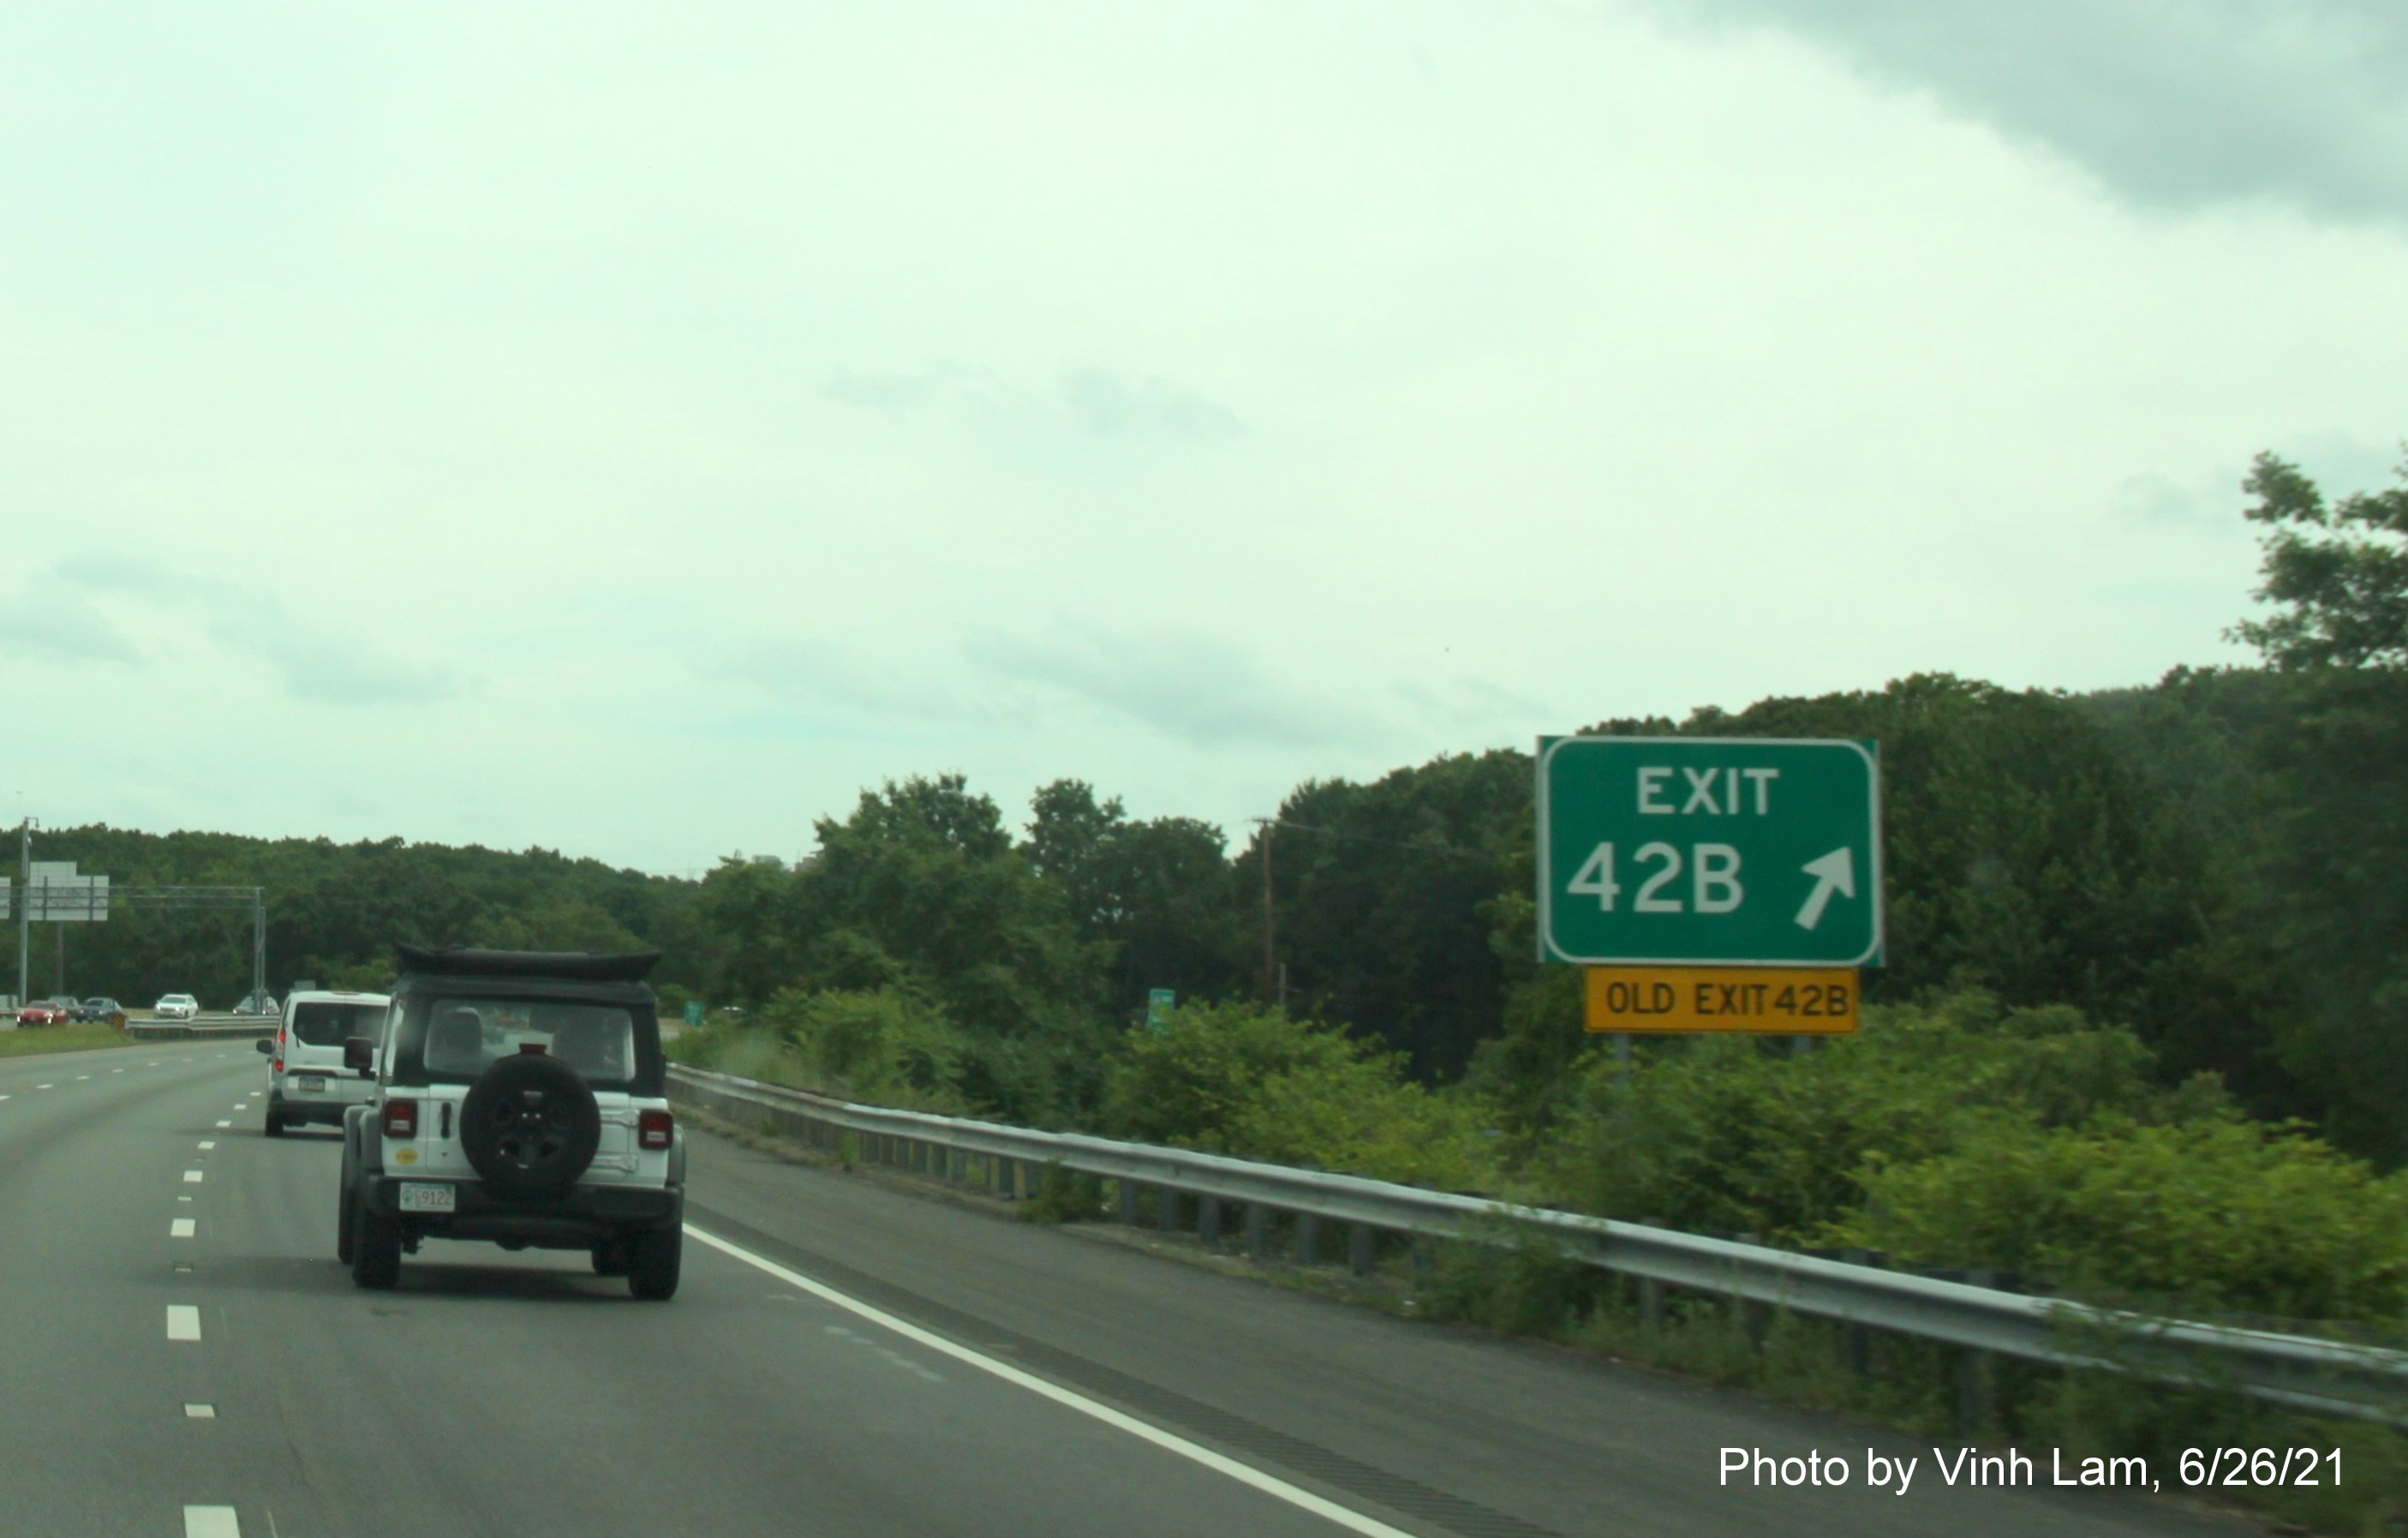 Image of gore sign for MA 114 West exit with old sequential exit number but also yellow Old Exit 42B sign attached below on I-495 South in North Andover, by Vinh Lam, June 2021